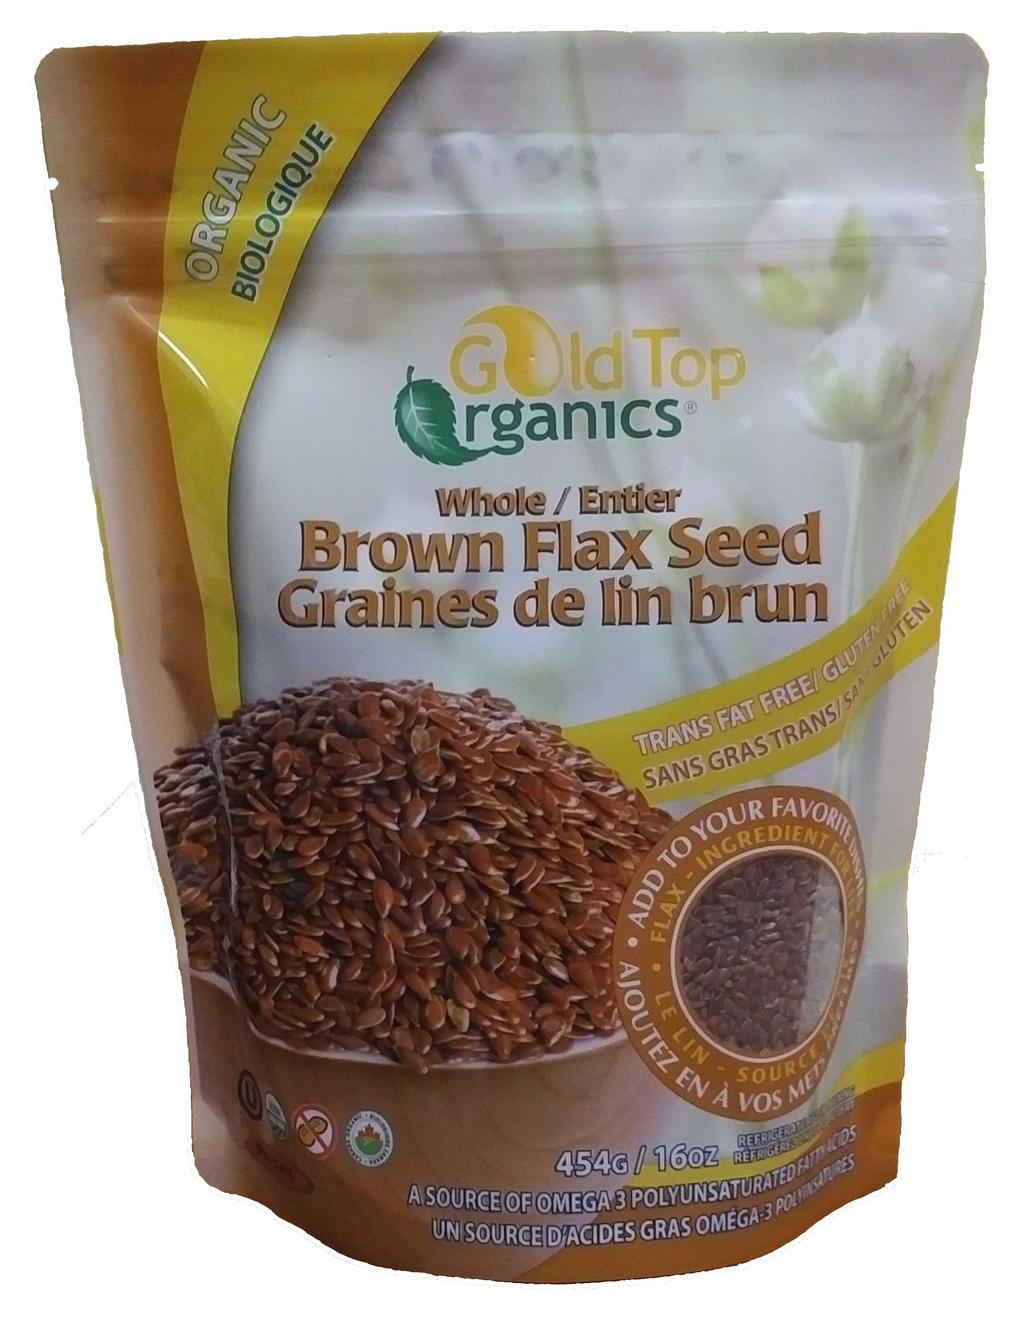 Page # 8 Flax Products Whole Brown Flax Seeds Made from the highest quality organic seeds grown in Western Canada. Non-hydrogenated and trans-fat free.